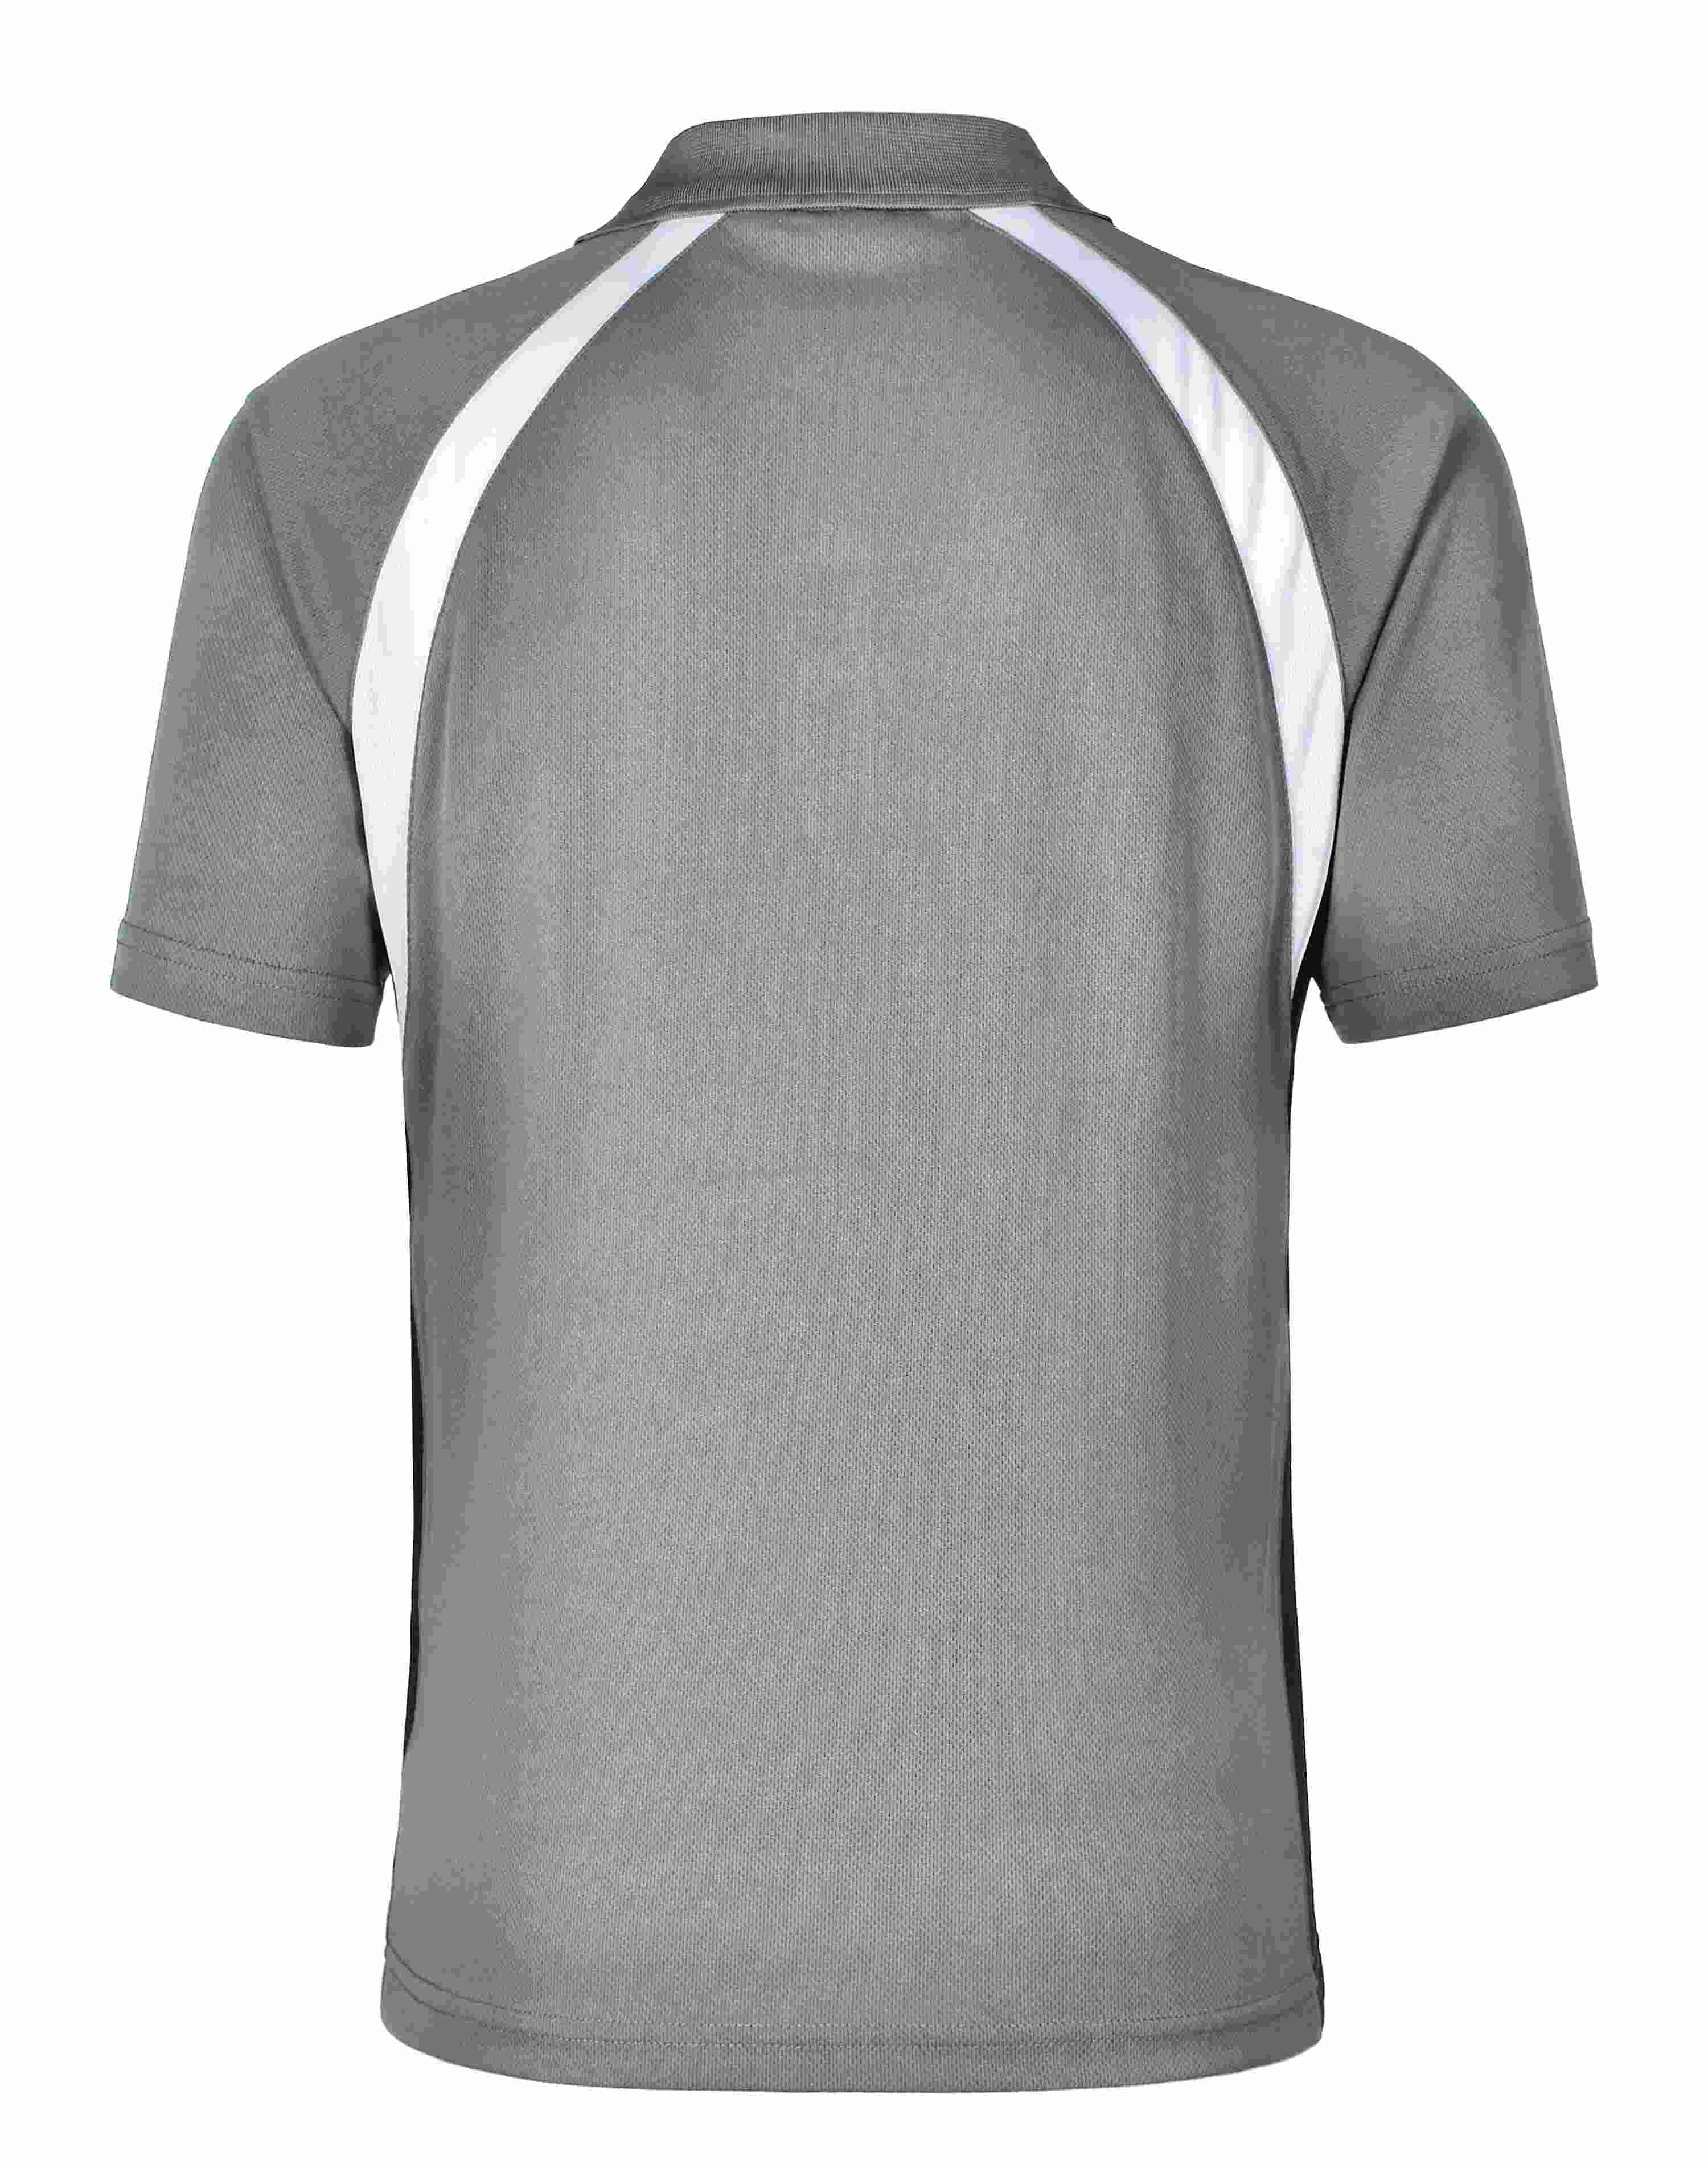 Personalized Short Sleeve Sports Polos Online Perth Australia